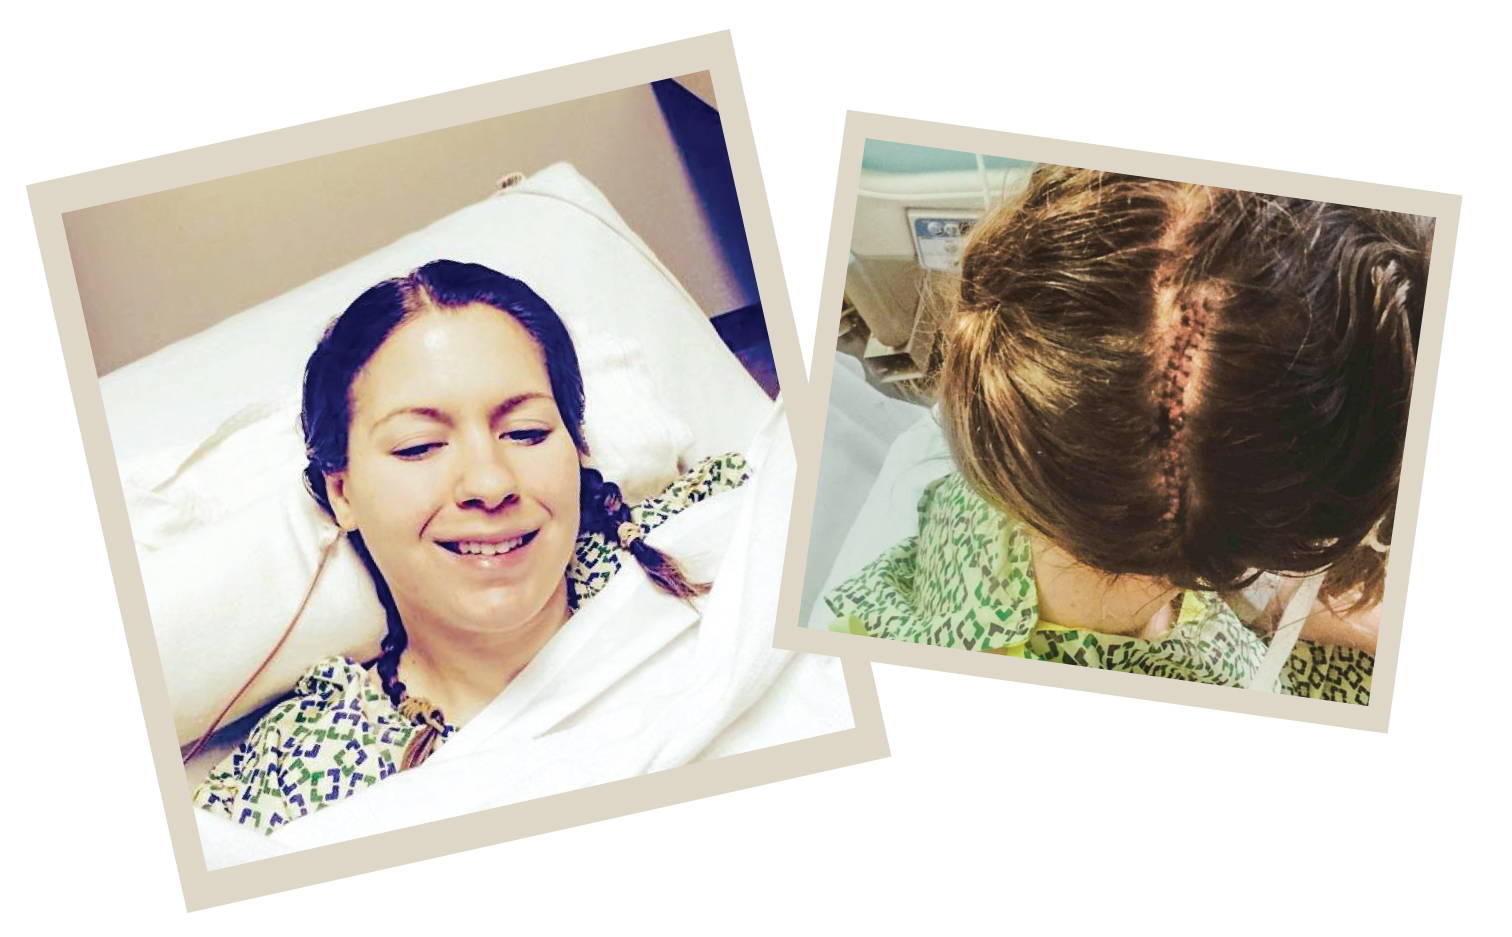 Left image: Molly Bookmyer recovers from brain surgery in her hospital bed. Right image: Molly Bookmyer shows her cranial scar from brain surgery